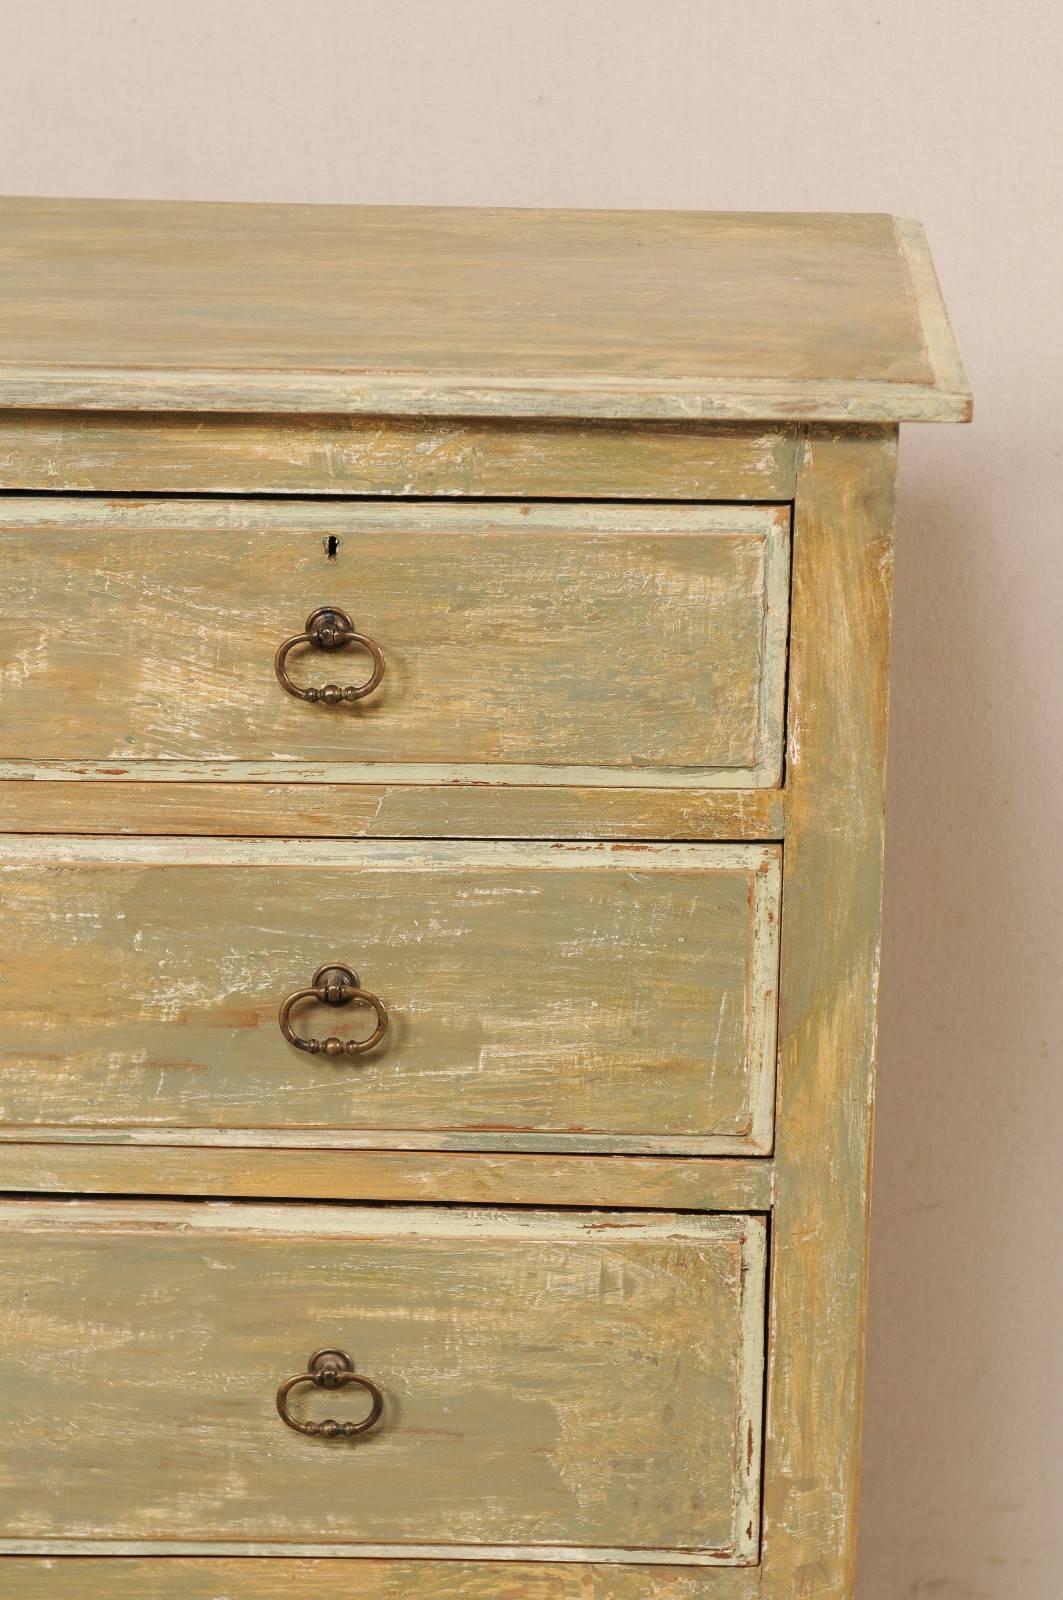 20th Century Swedish Painted Wood Five-Drawer Antique Chest in Green-Grey and Beige Tones